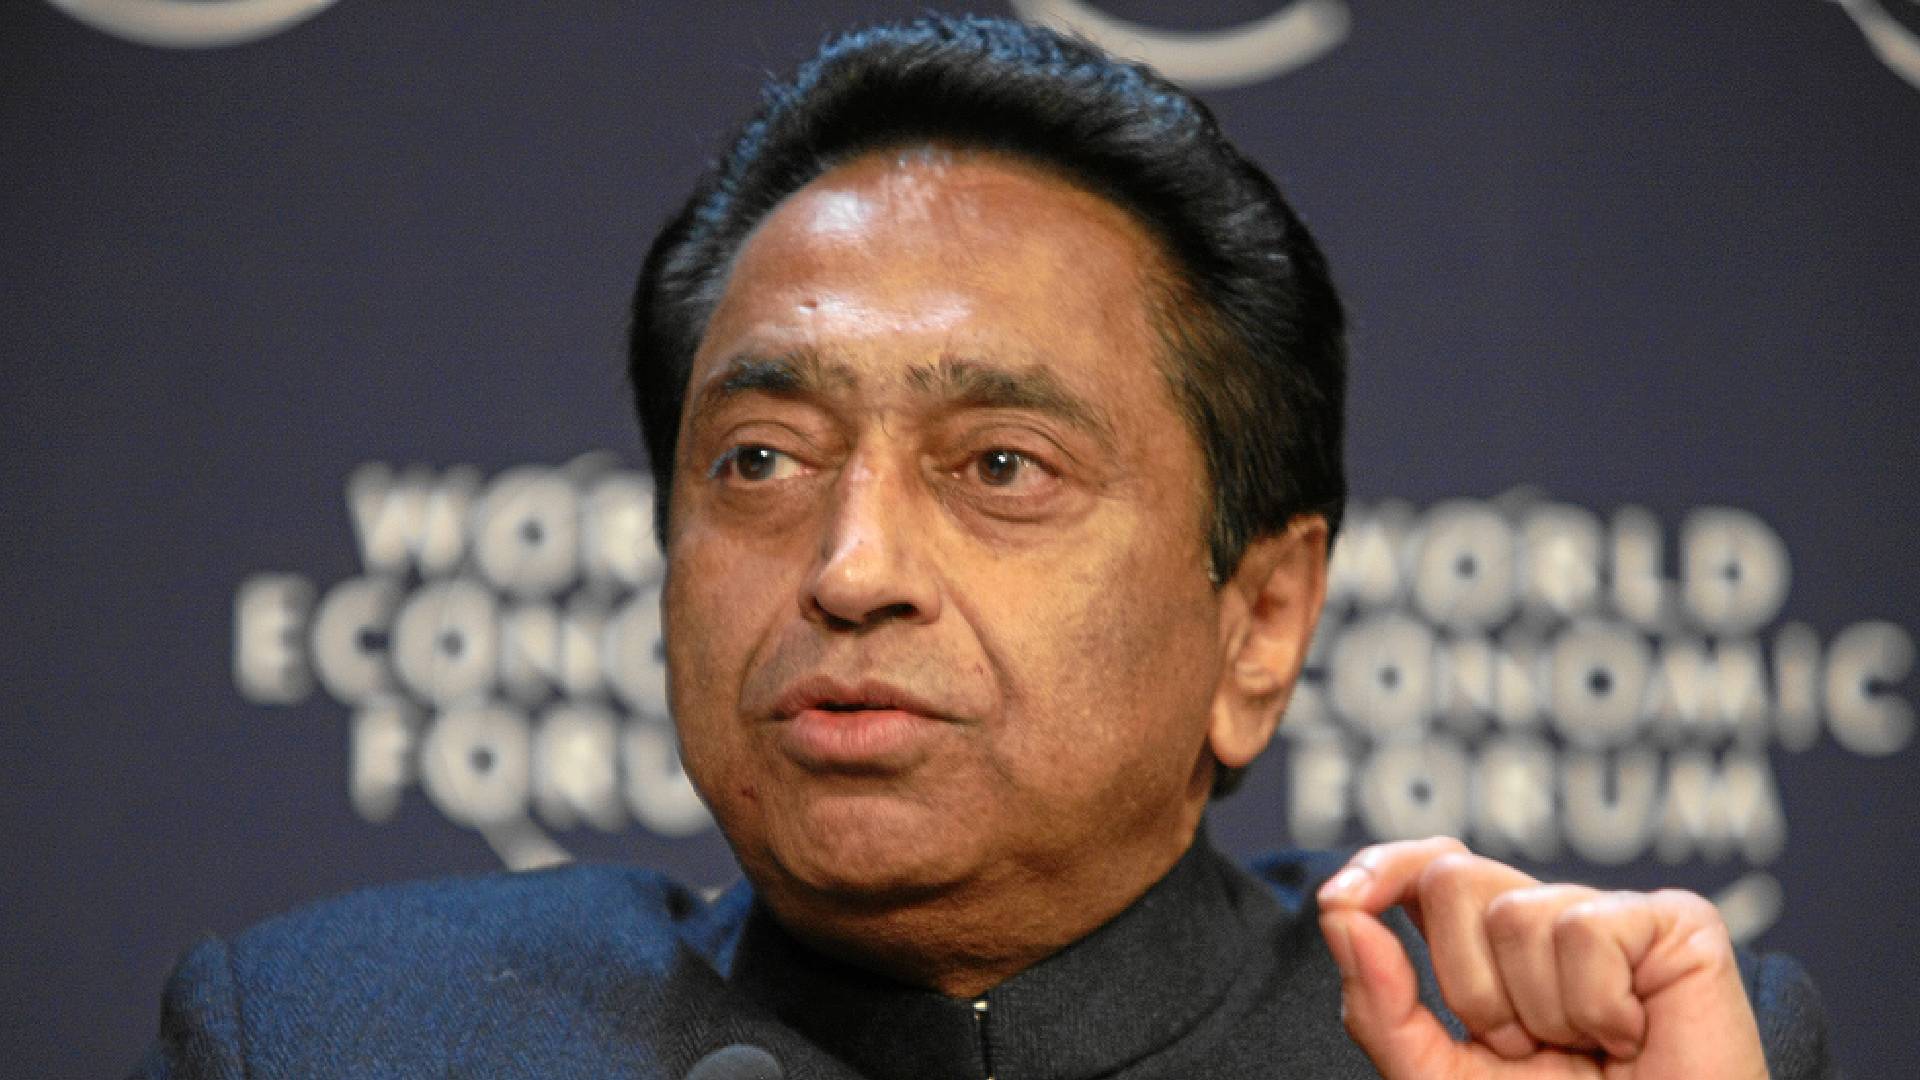 BJP has not done anything for Chhindwara in last 20 years, claims Kamal Nath